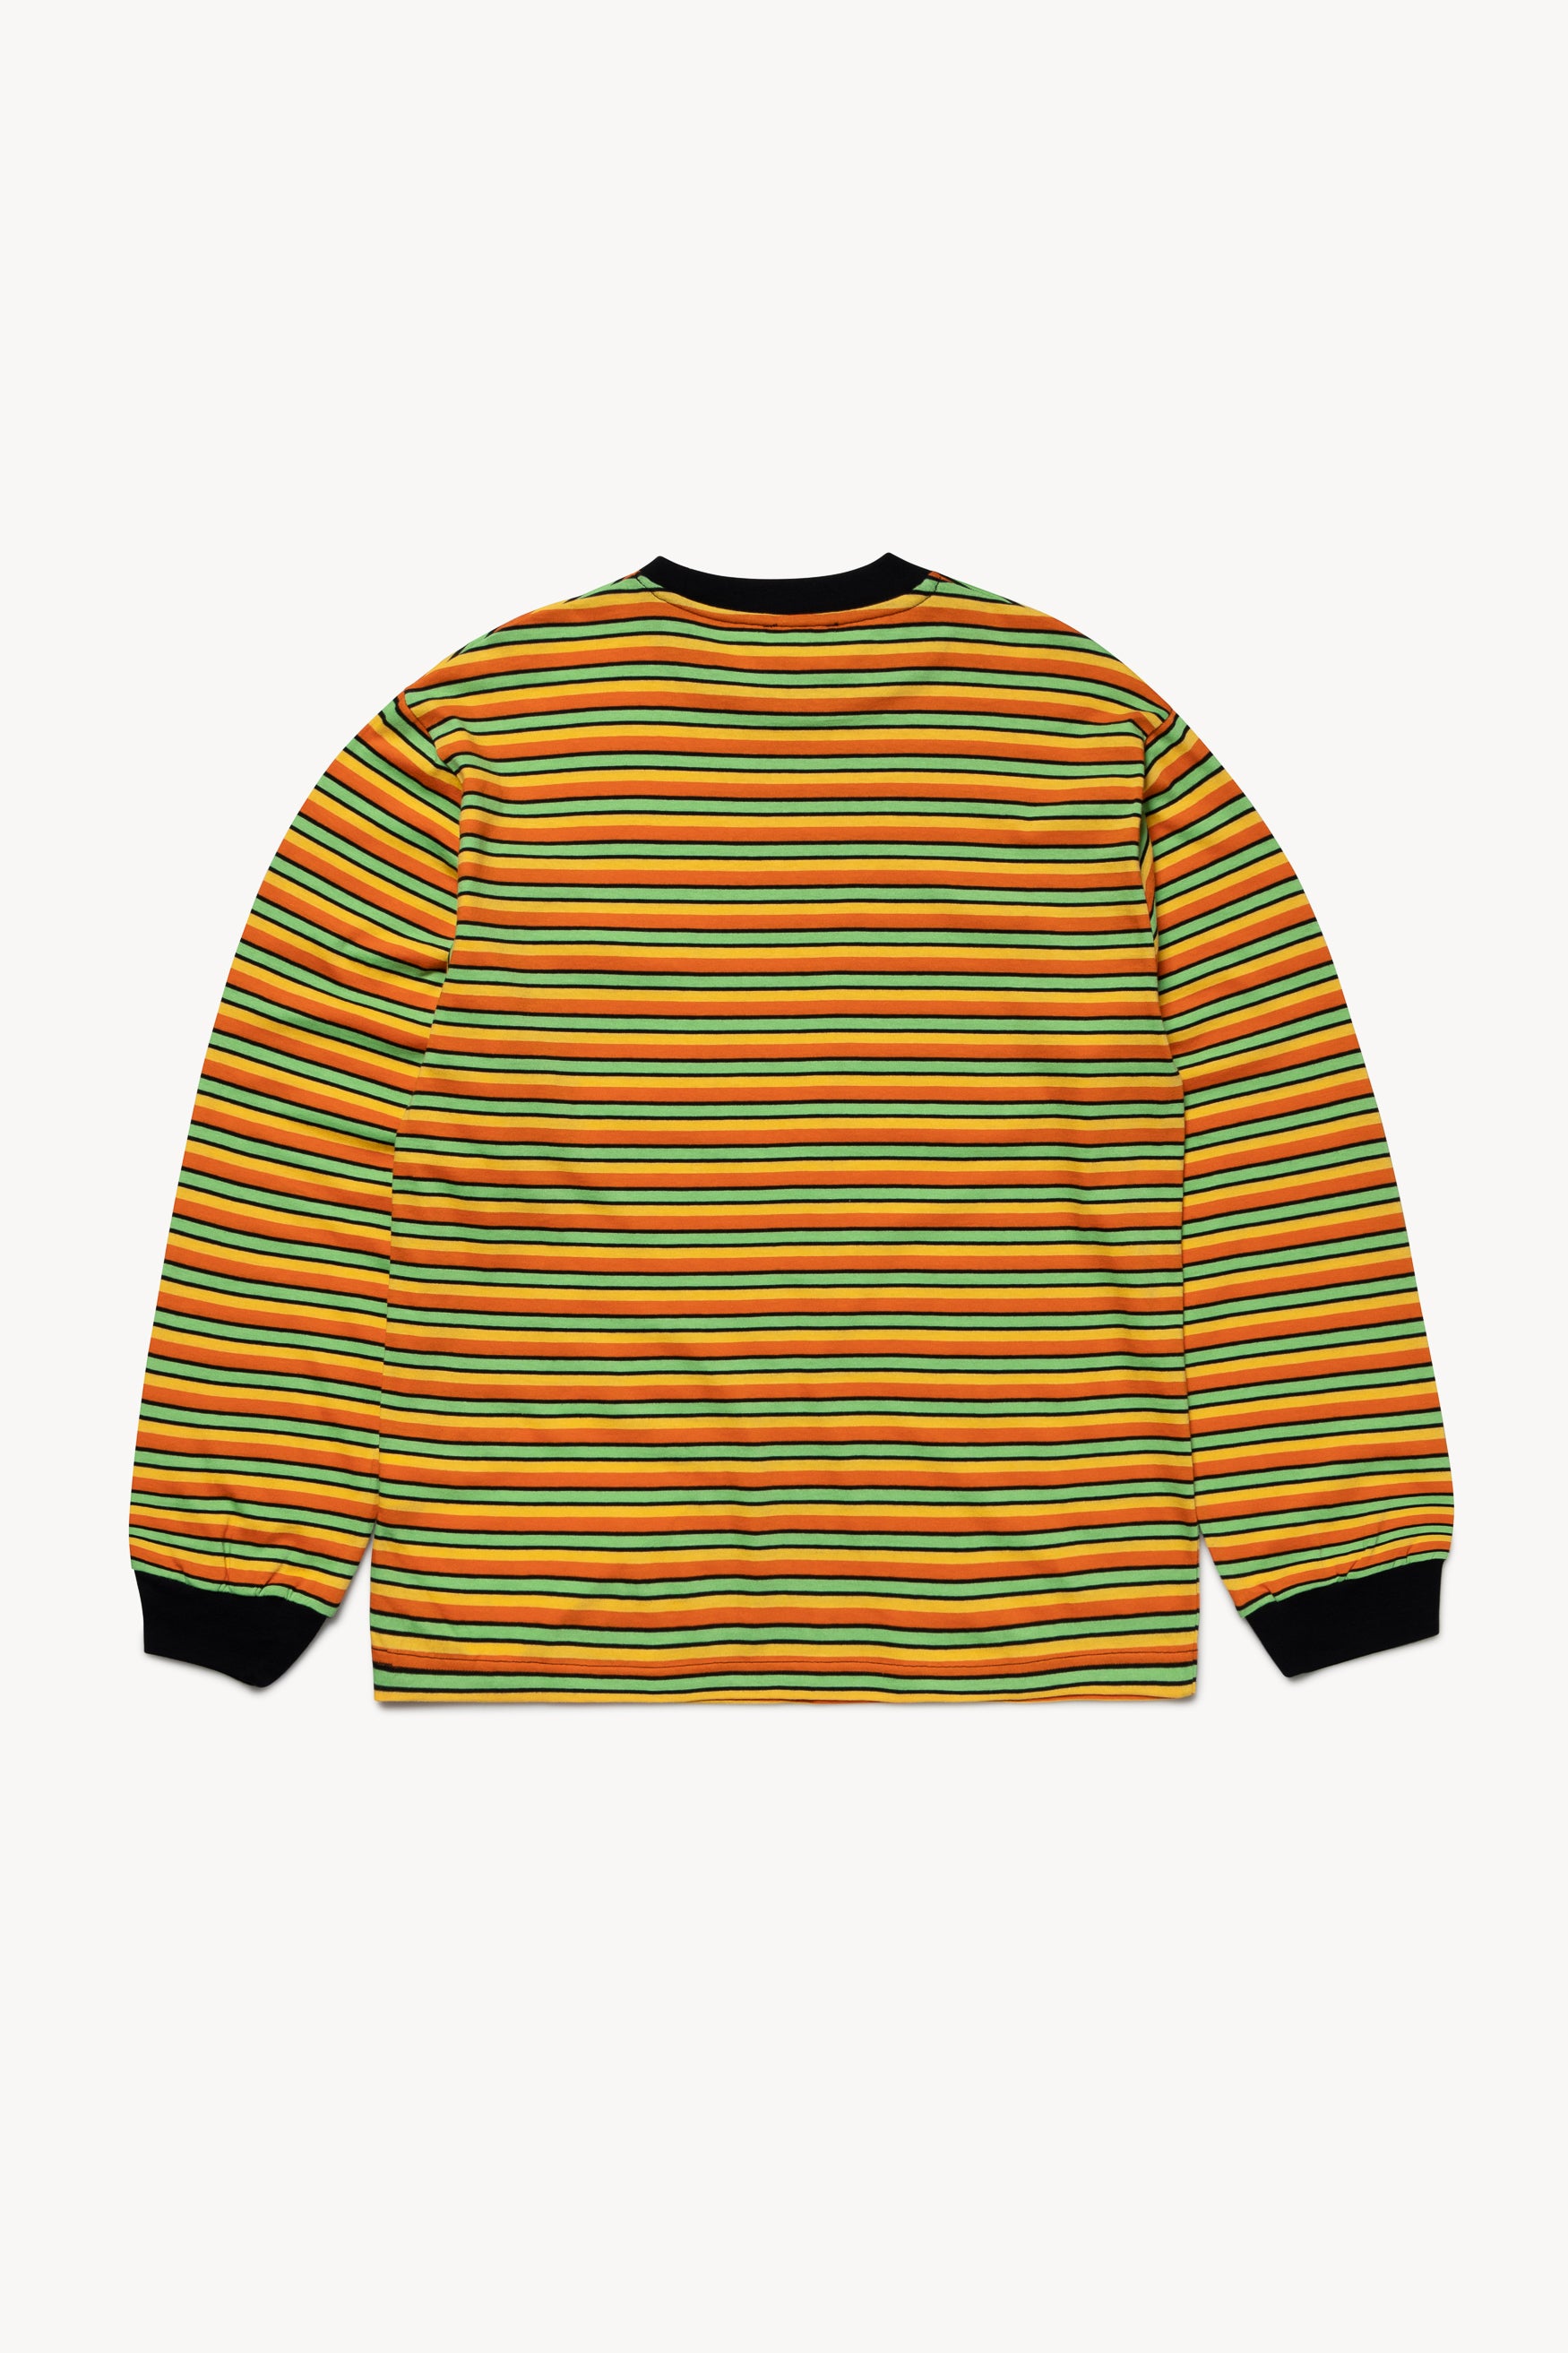 Load image into Gallery viewer, Striped Pocket Tee